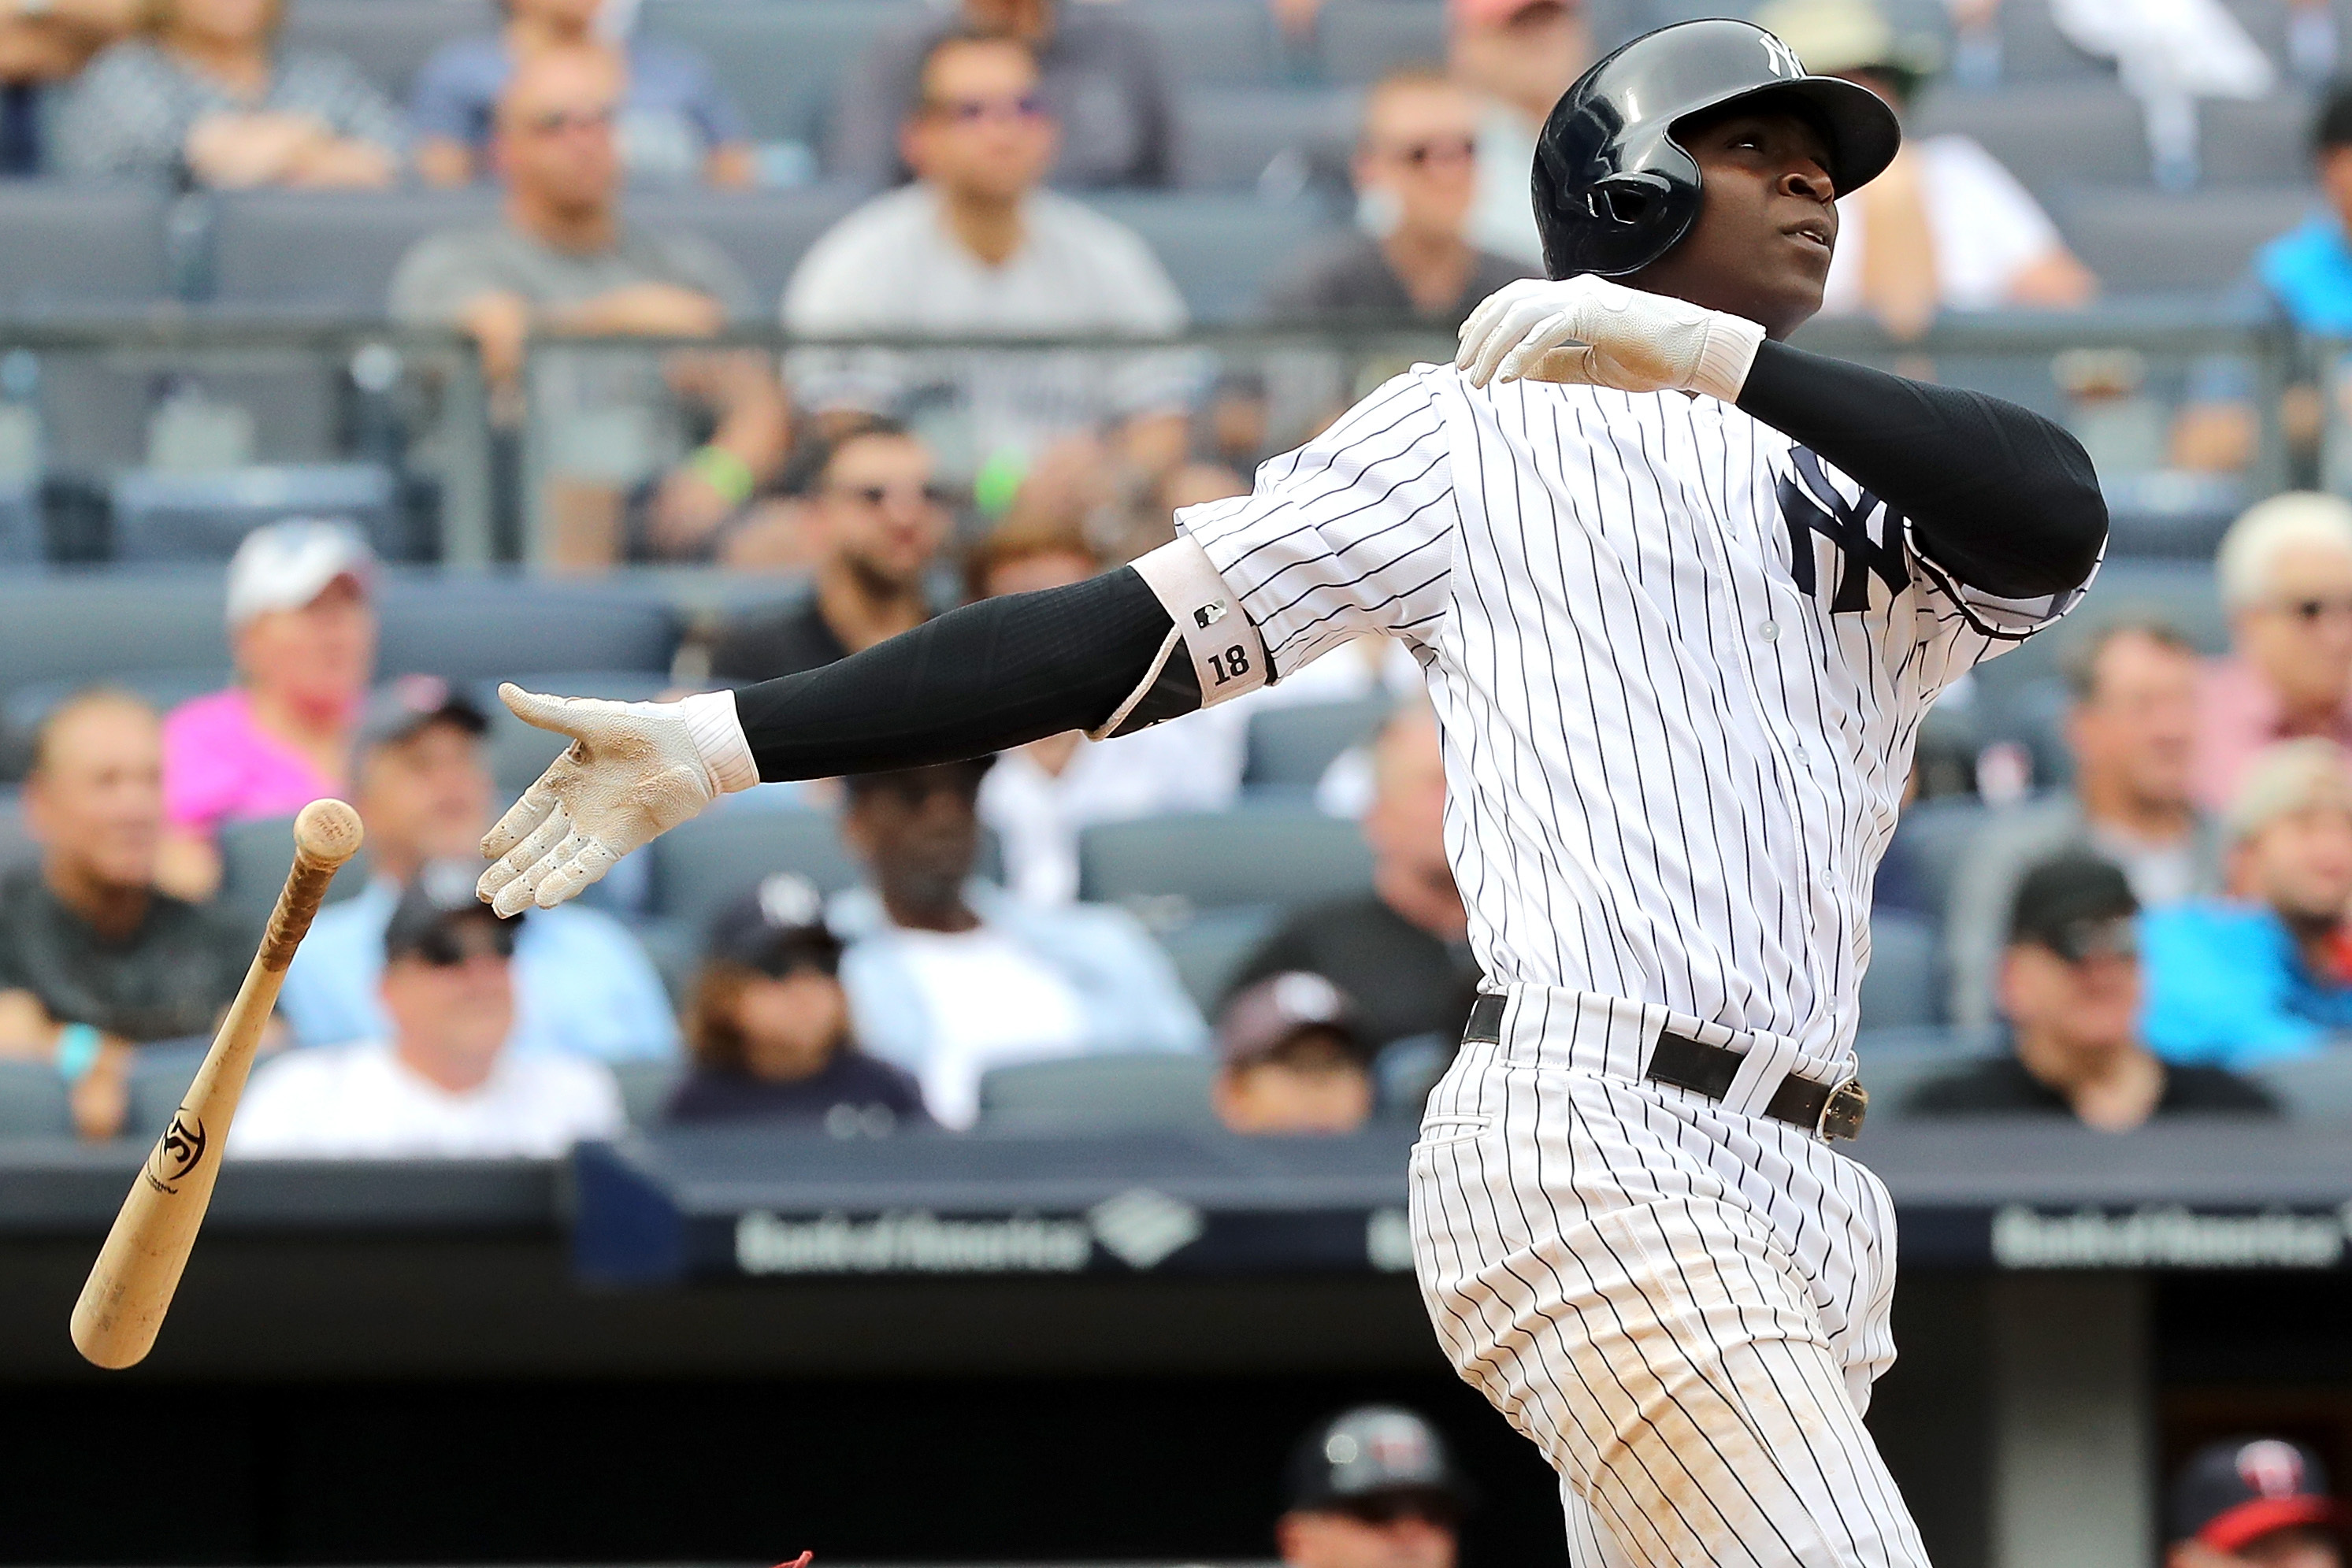 New York Yankees shortstop Didi Gregorius stands on first base